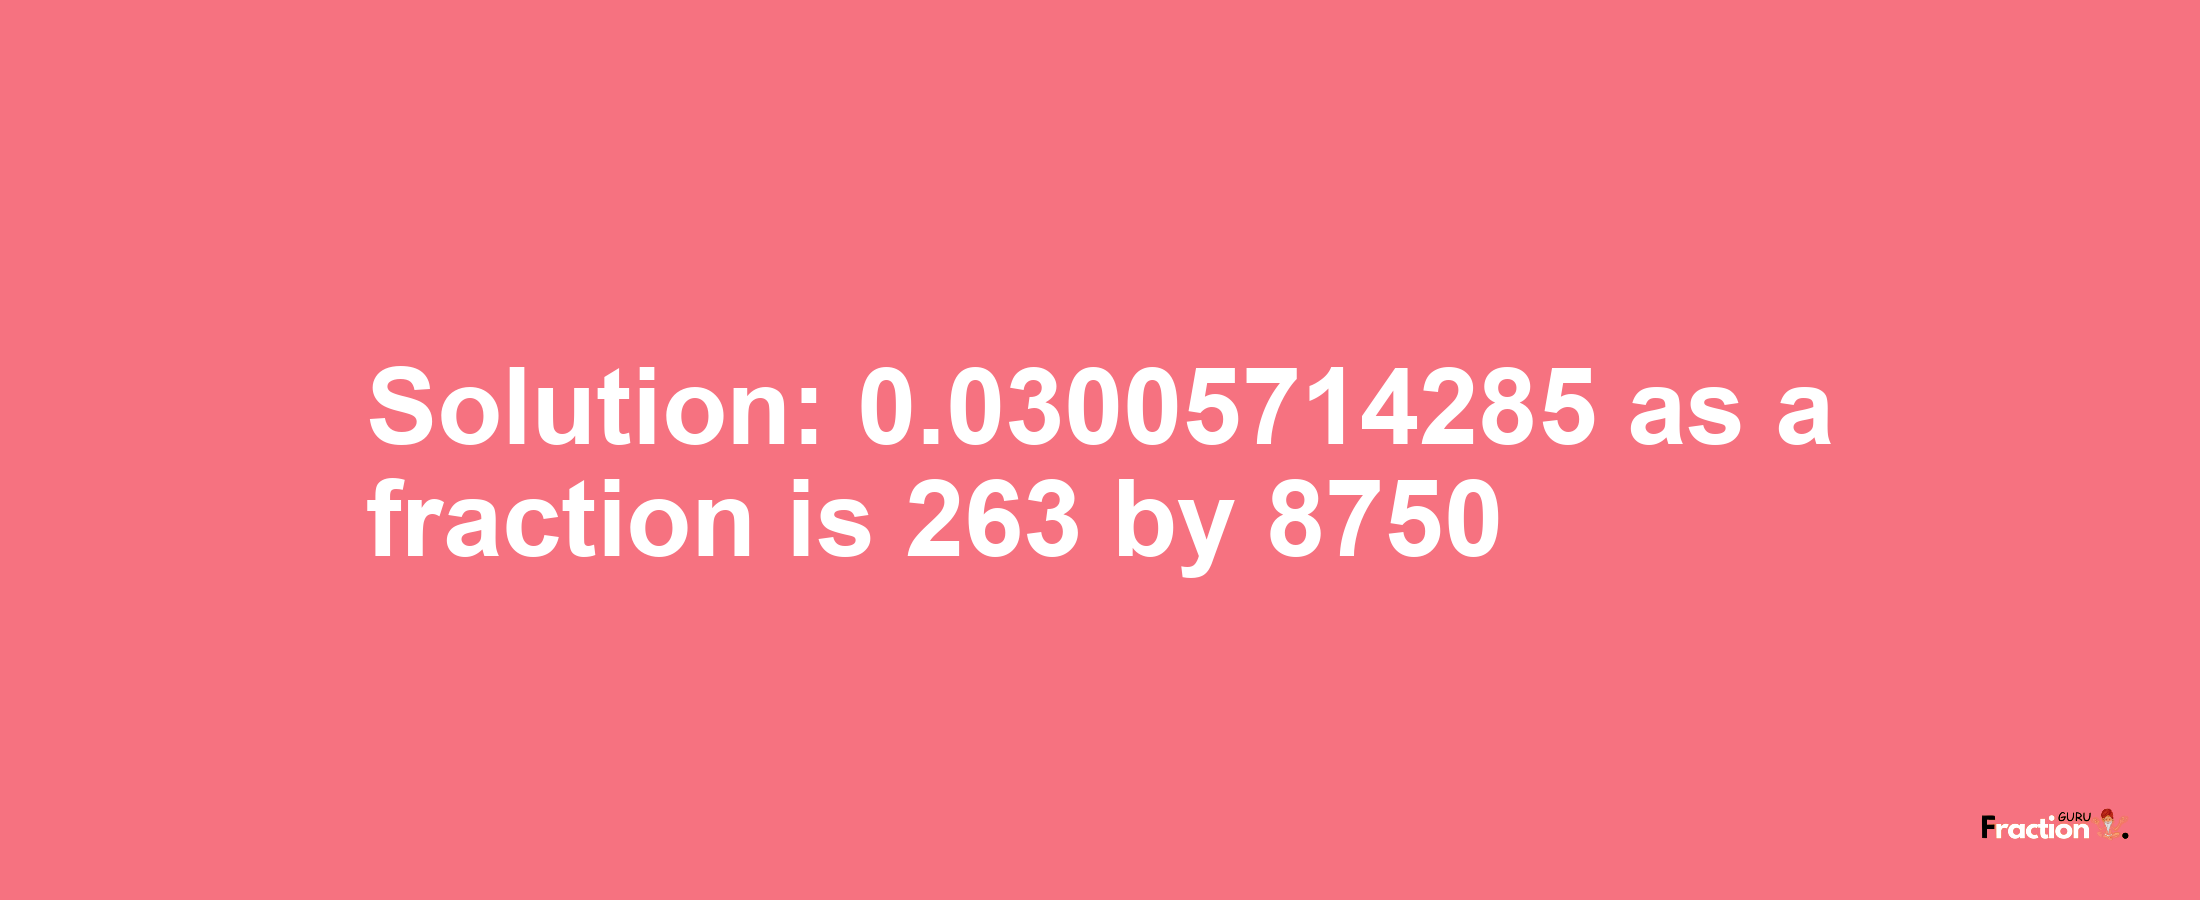 Solution:0.03005714285 as a fraction is 263/8750